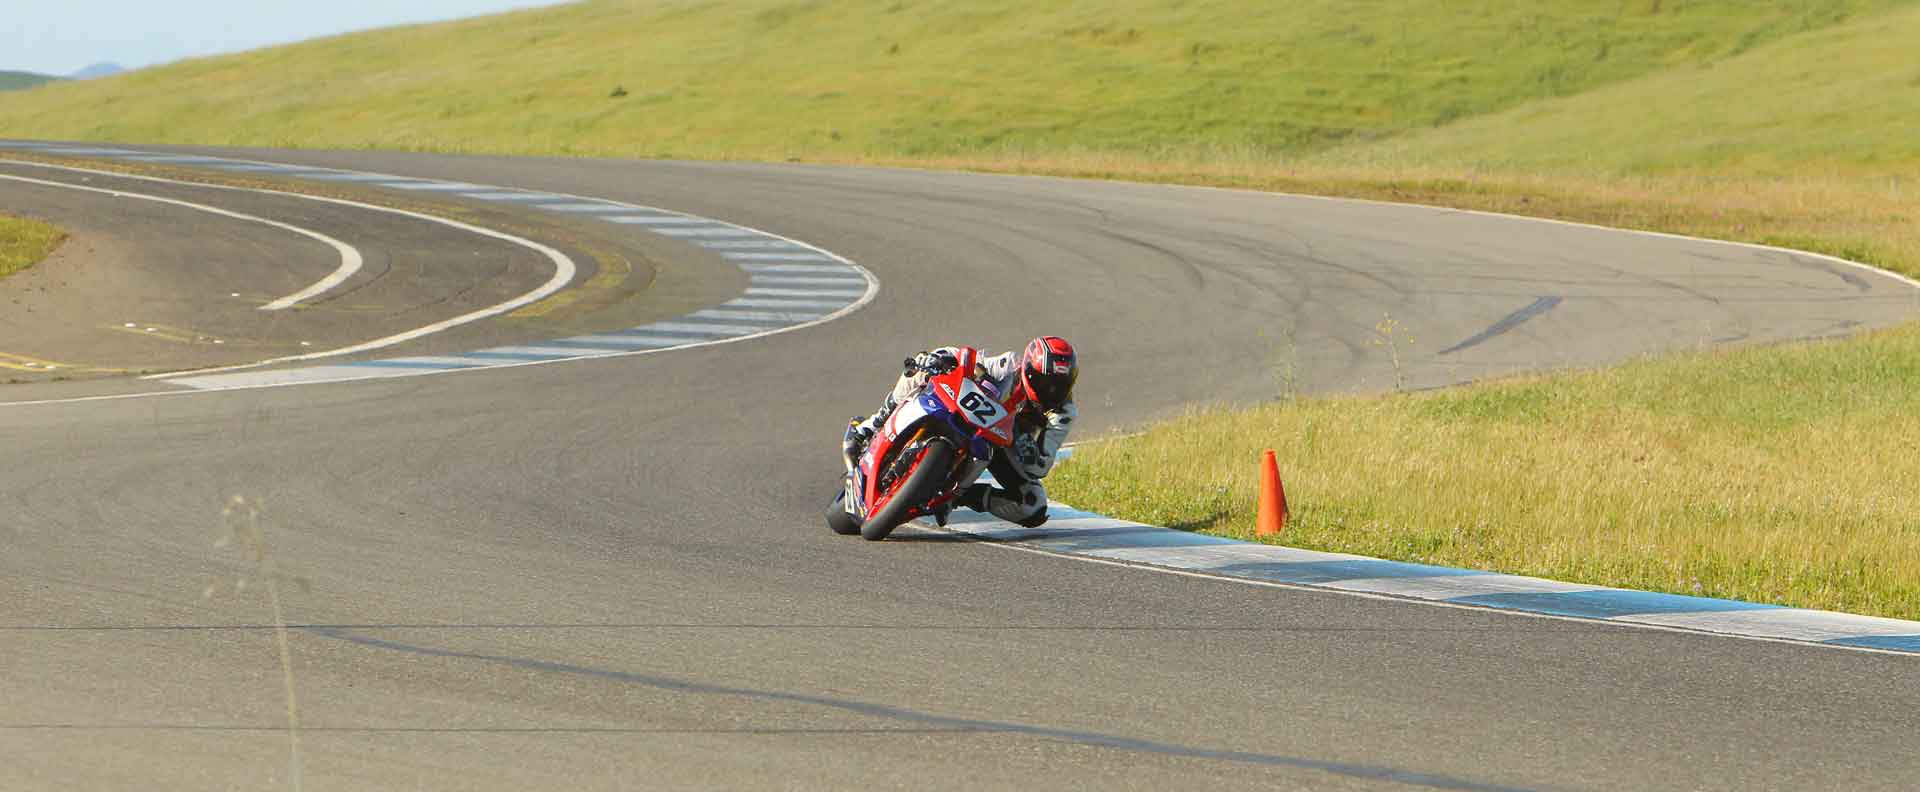 Andy riding through the curves at Thunderhill raceway on his R1 motorcycle backed by Oregon motorcycle attorney Mike Colbach